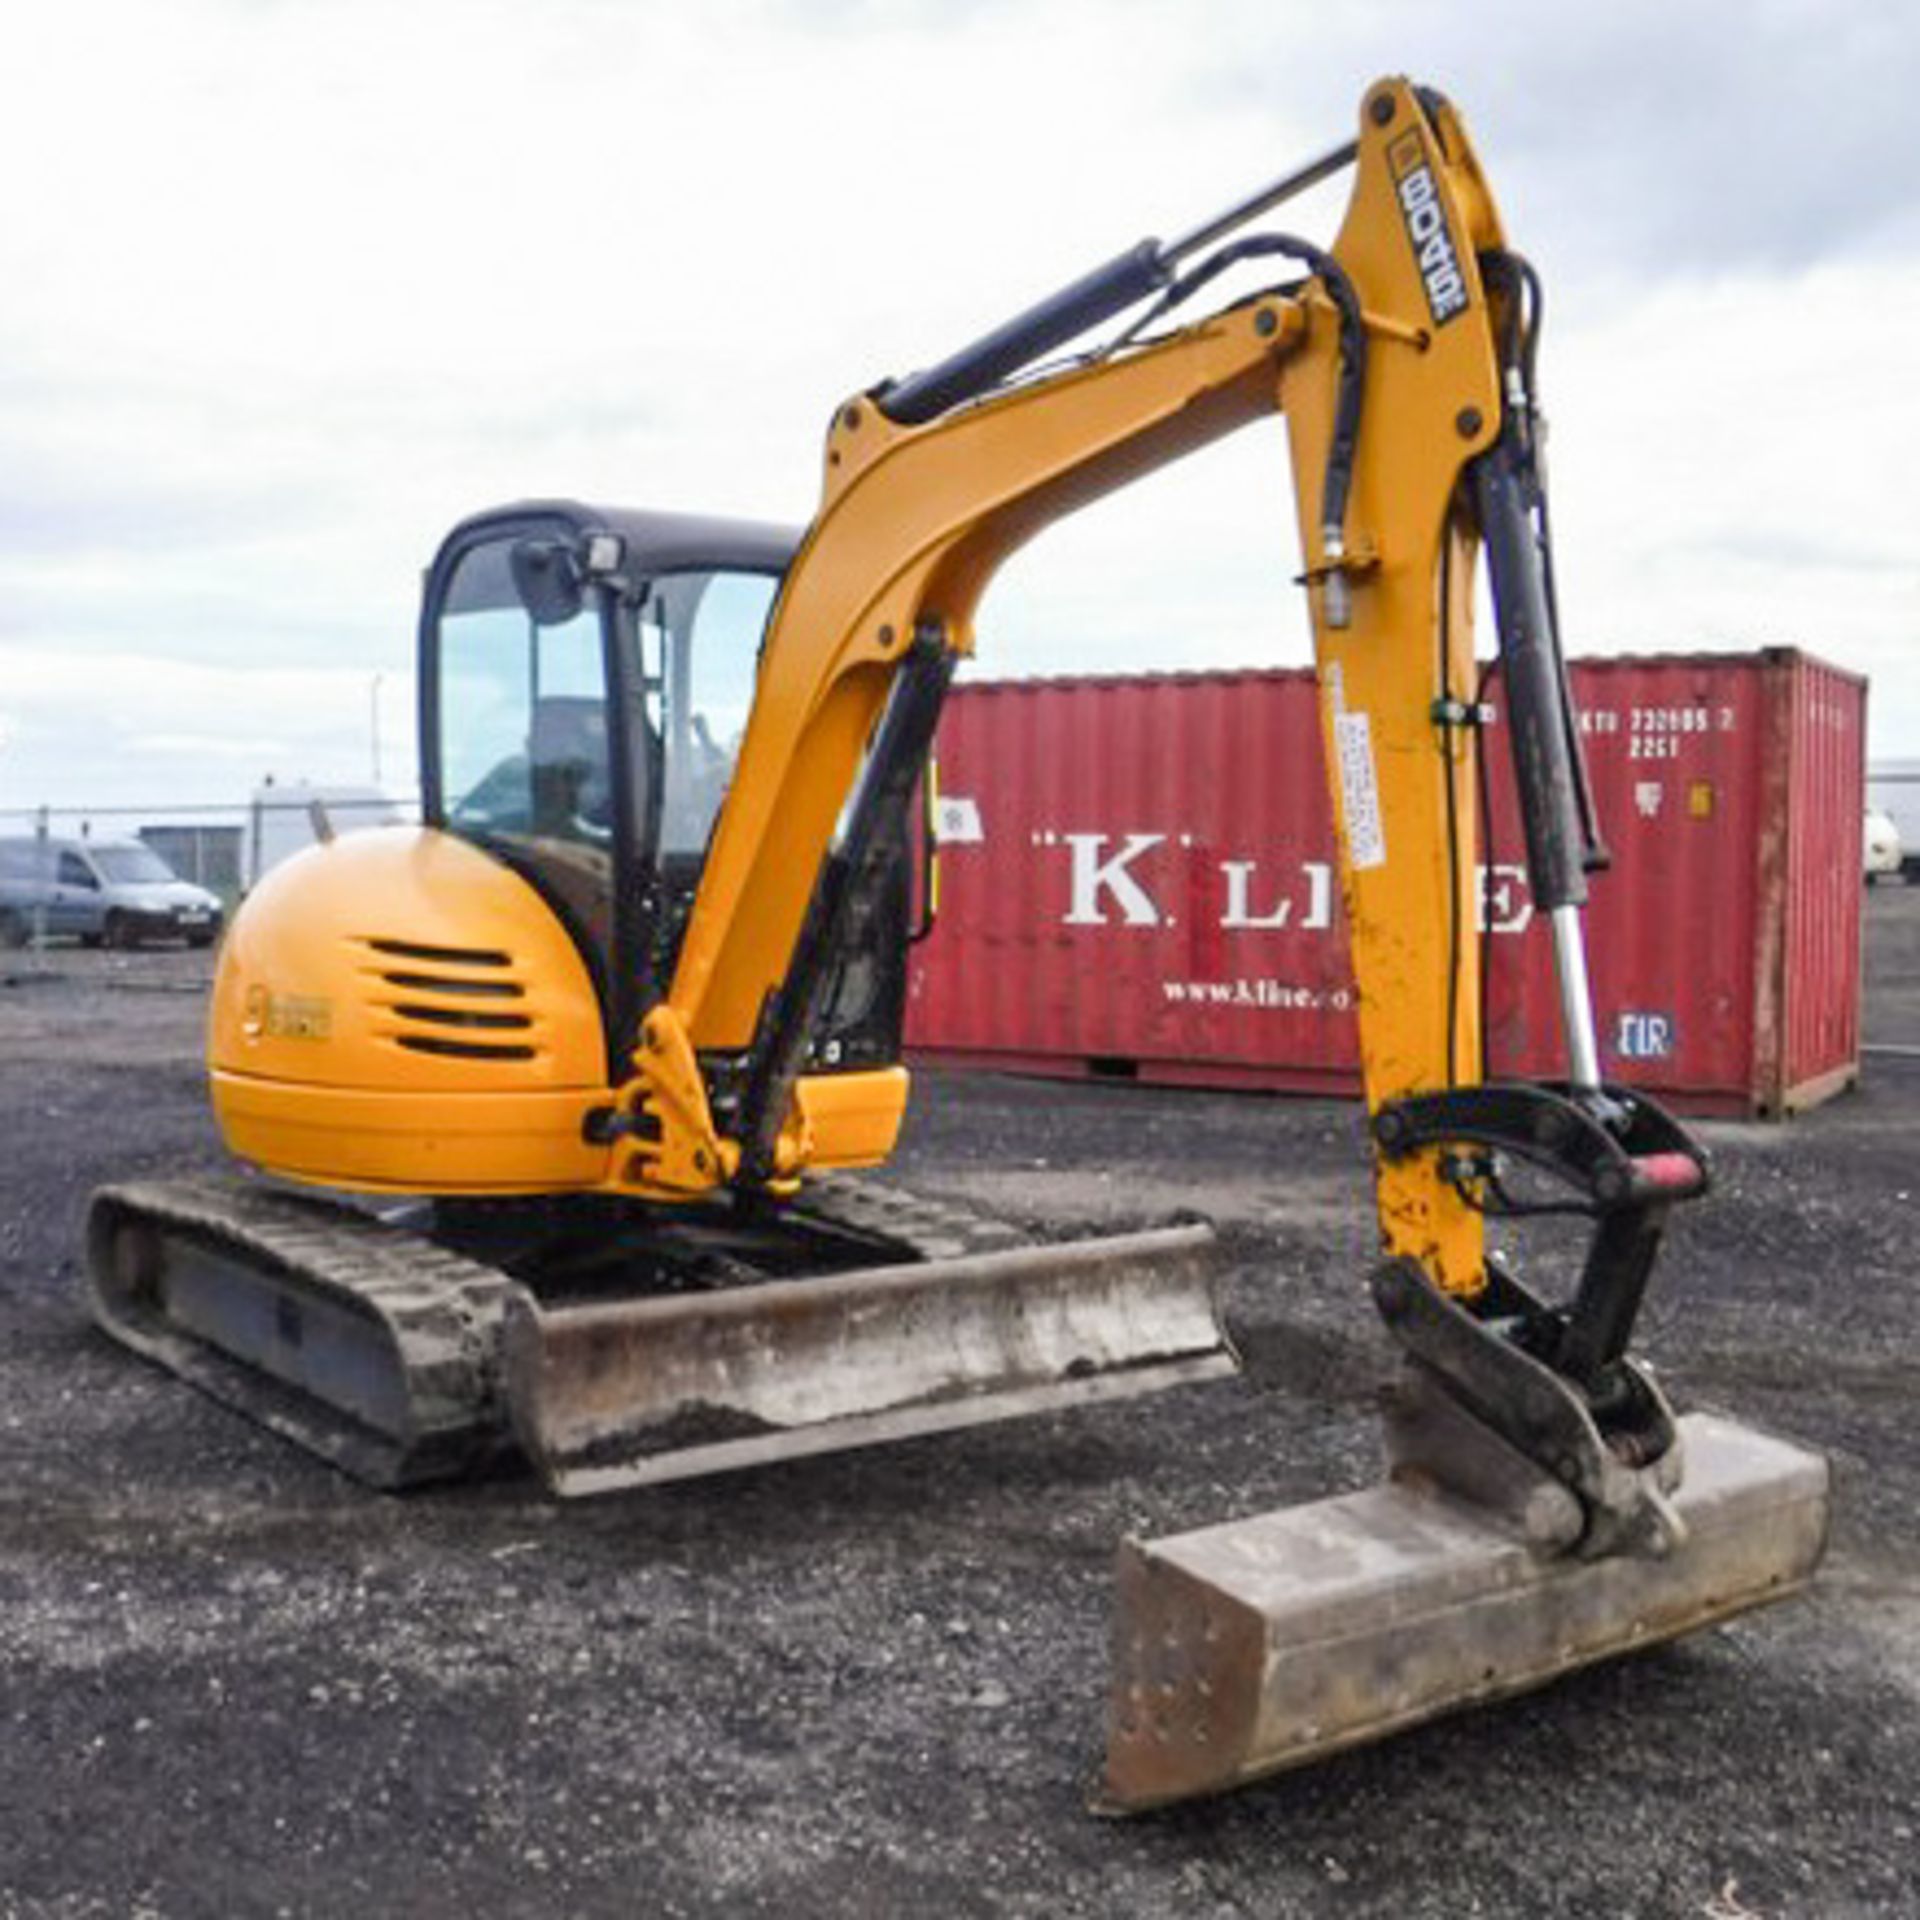 2013 JCB 8045 ZTS, S/N 01071286, REG MX512 2977HRS (SELLER VERIFIES HOURS CORRECT) 1 DITCHING BUCKET - Image 9 of 15